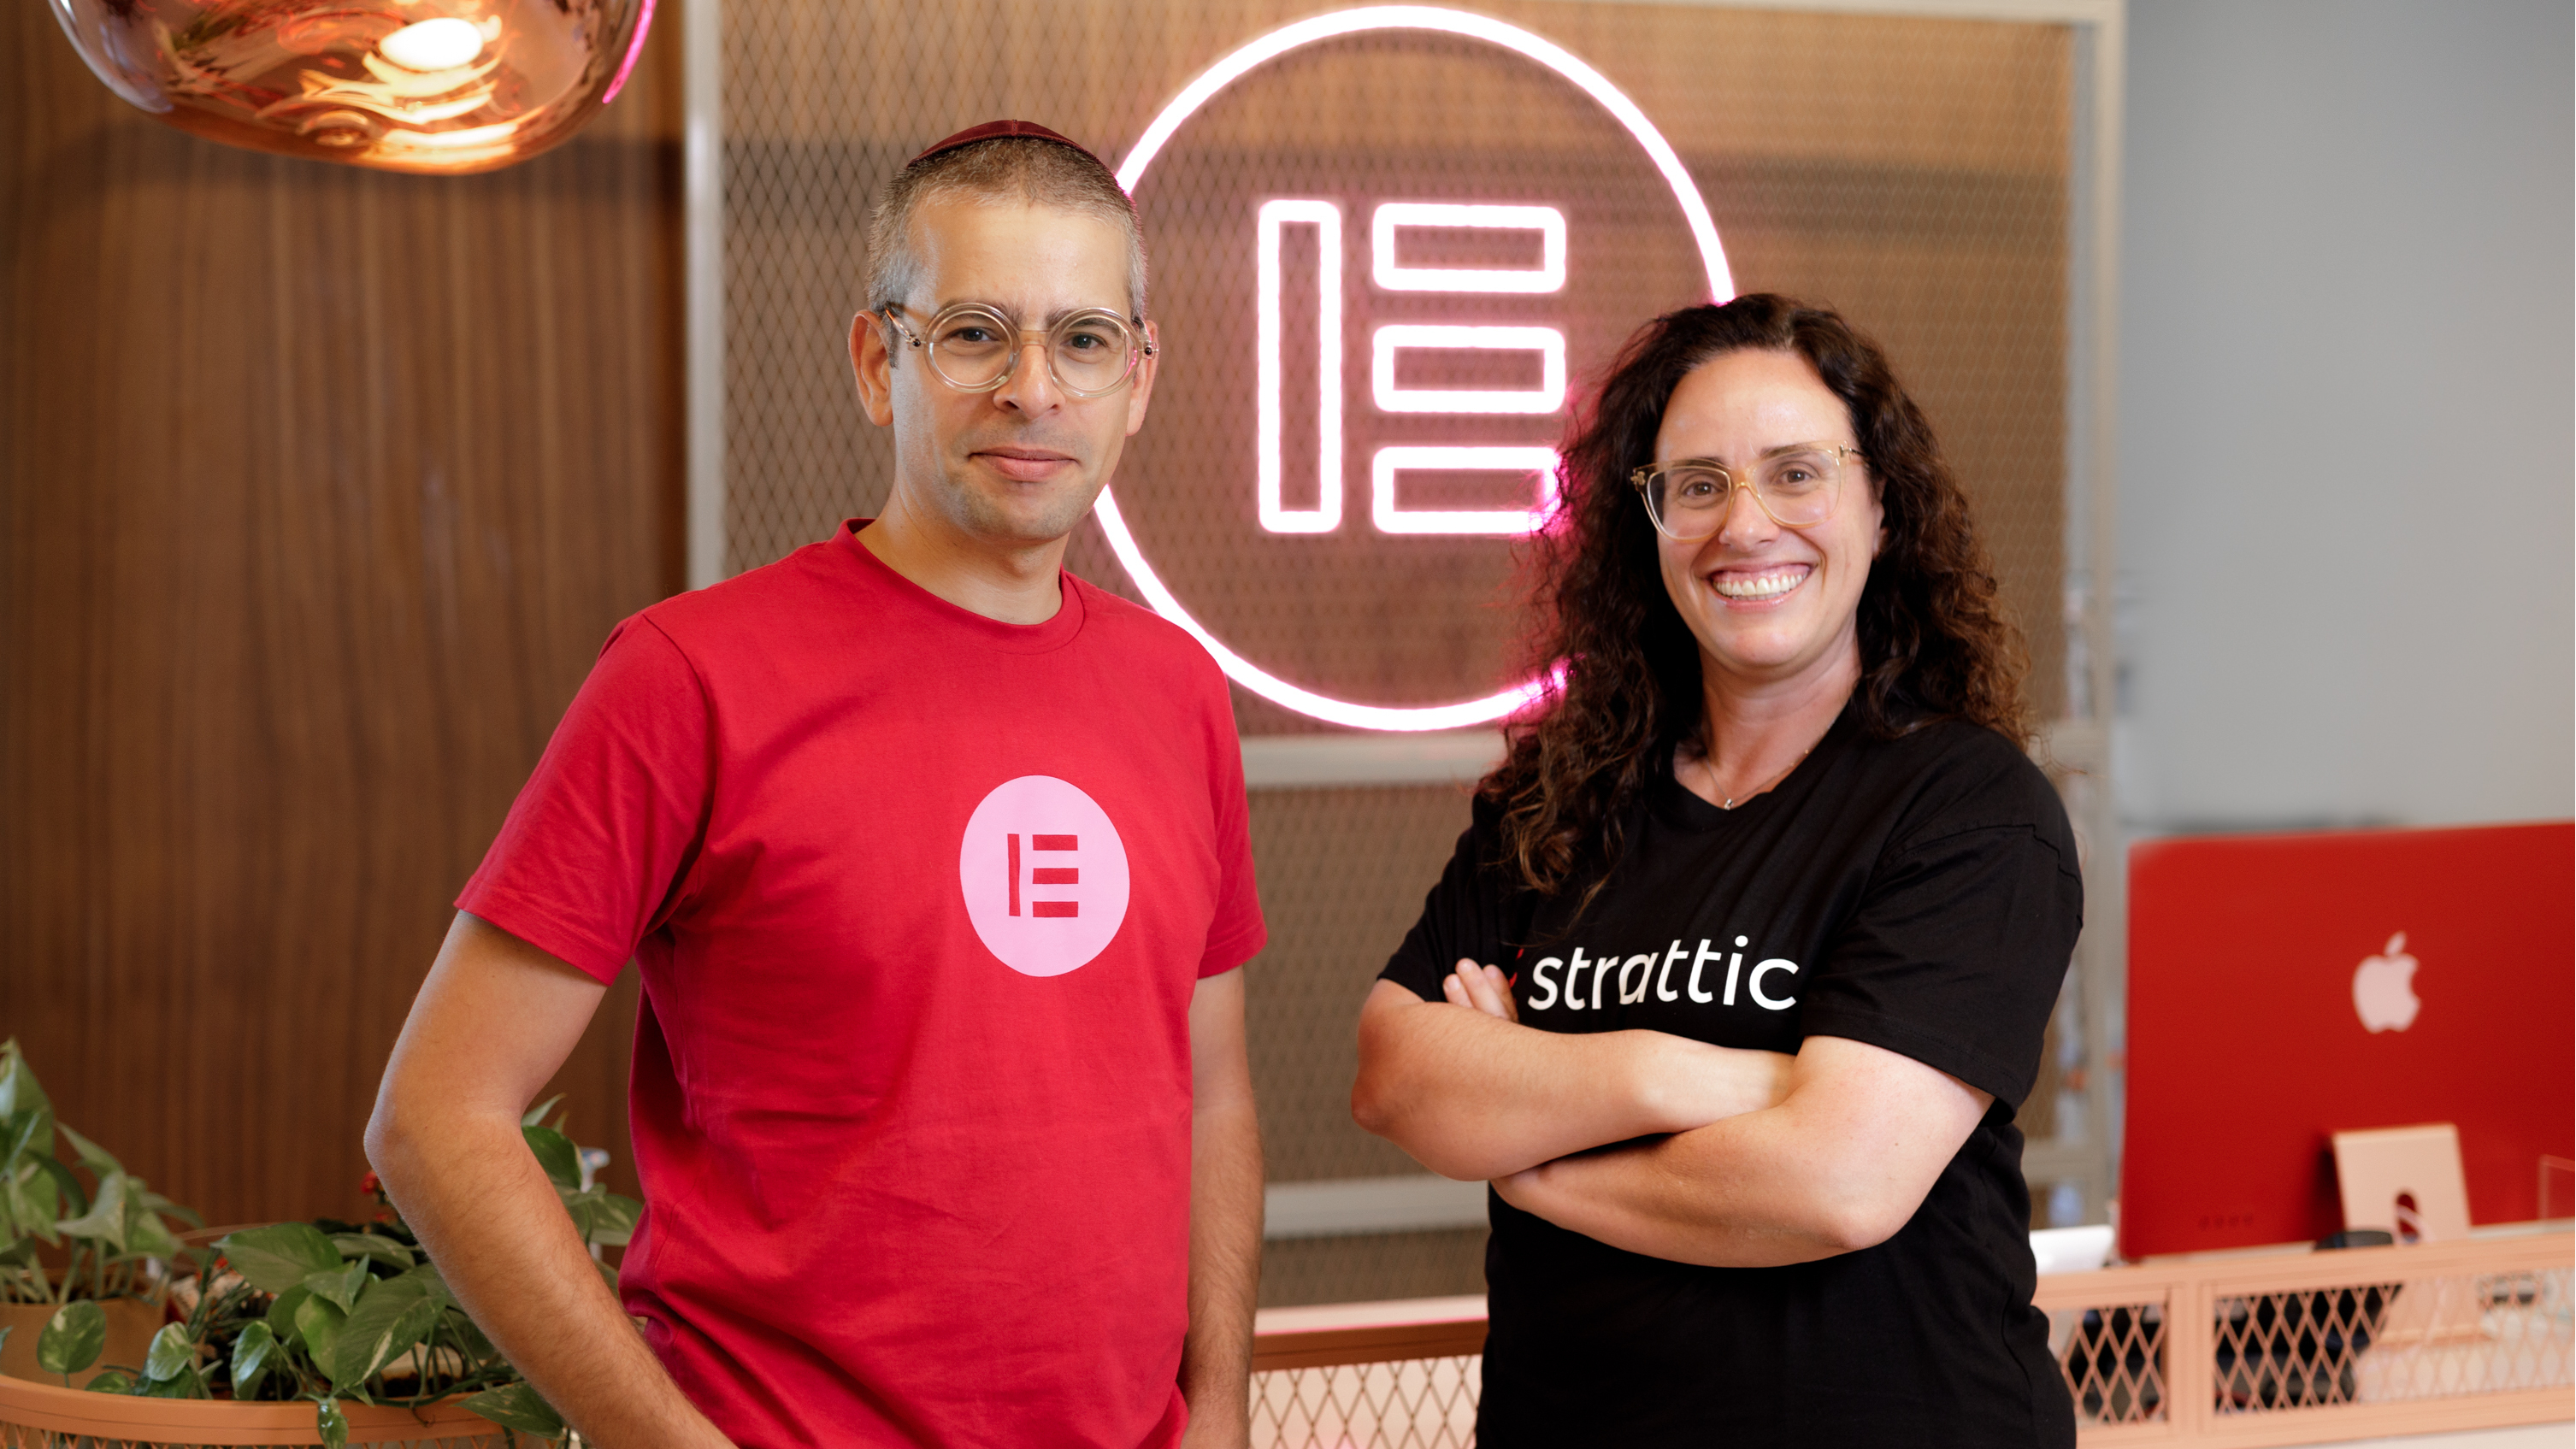 Yoni Luksenberg, CEO of Elementor and Miriam Schwab, CEO of Strattic standing in front of an Elementor sign